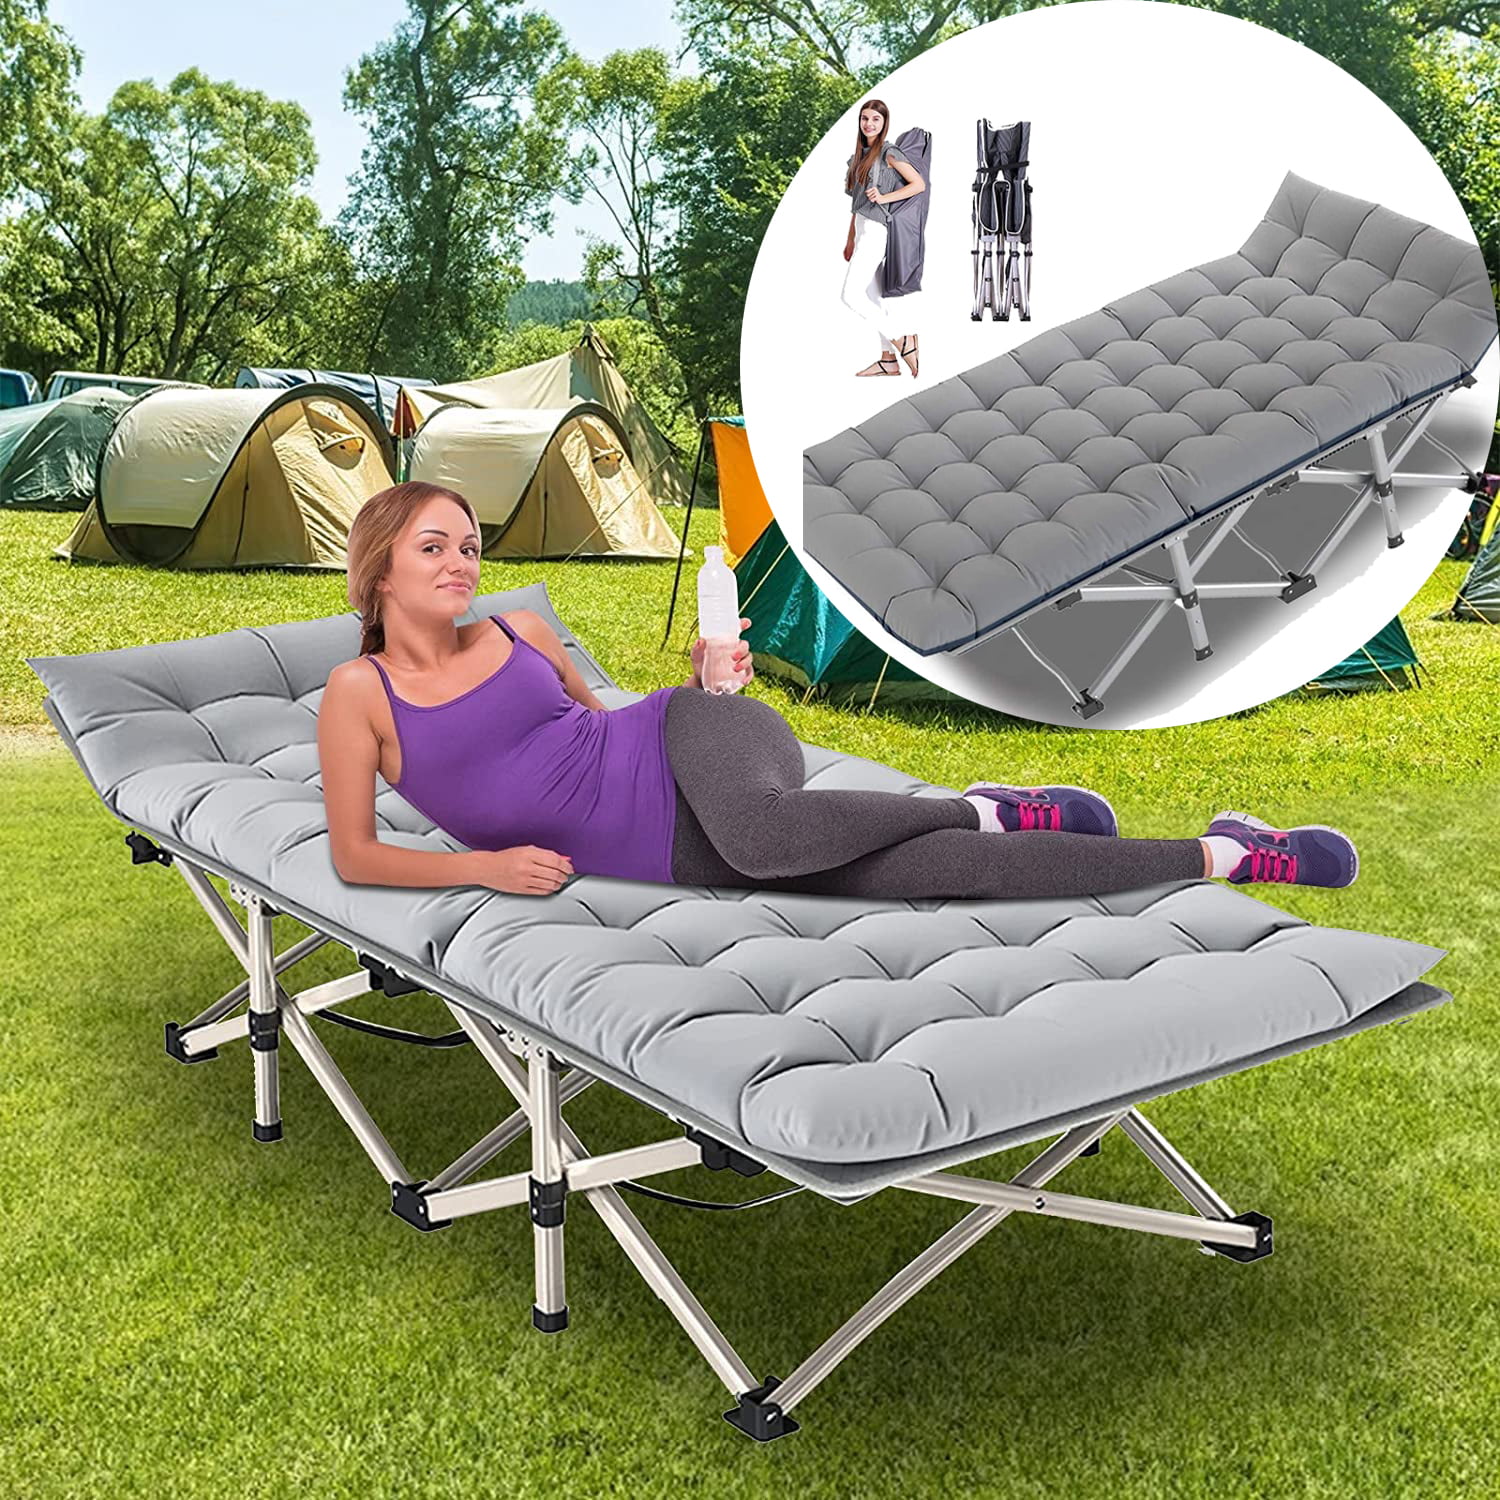 Portable Folding Bed Home Camping Travel Cot+Keepwarm Thickened Pearl Cotton Pad 